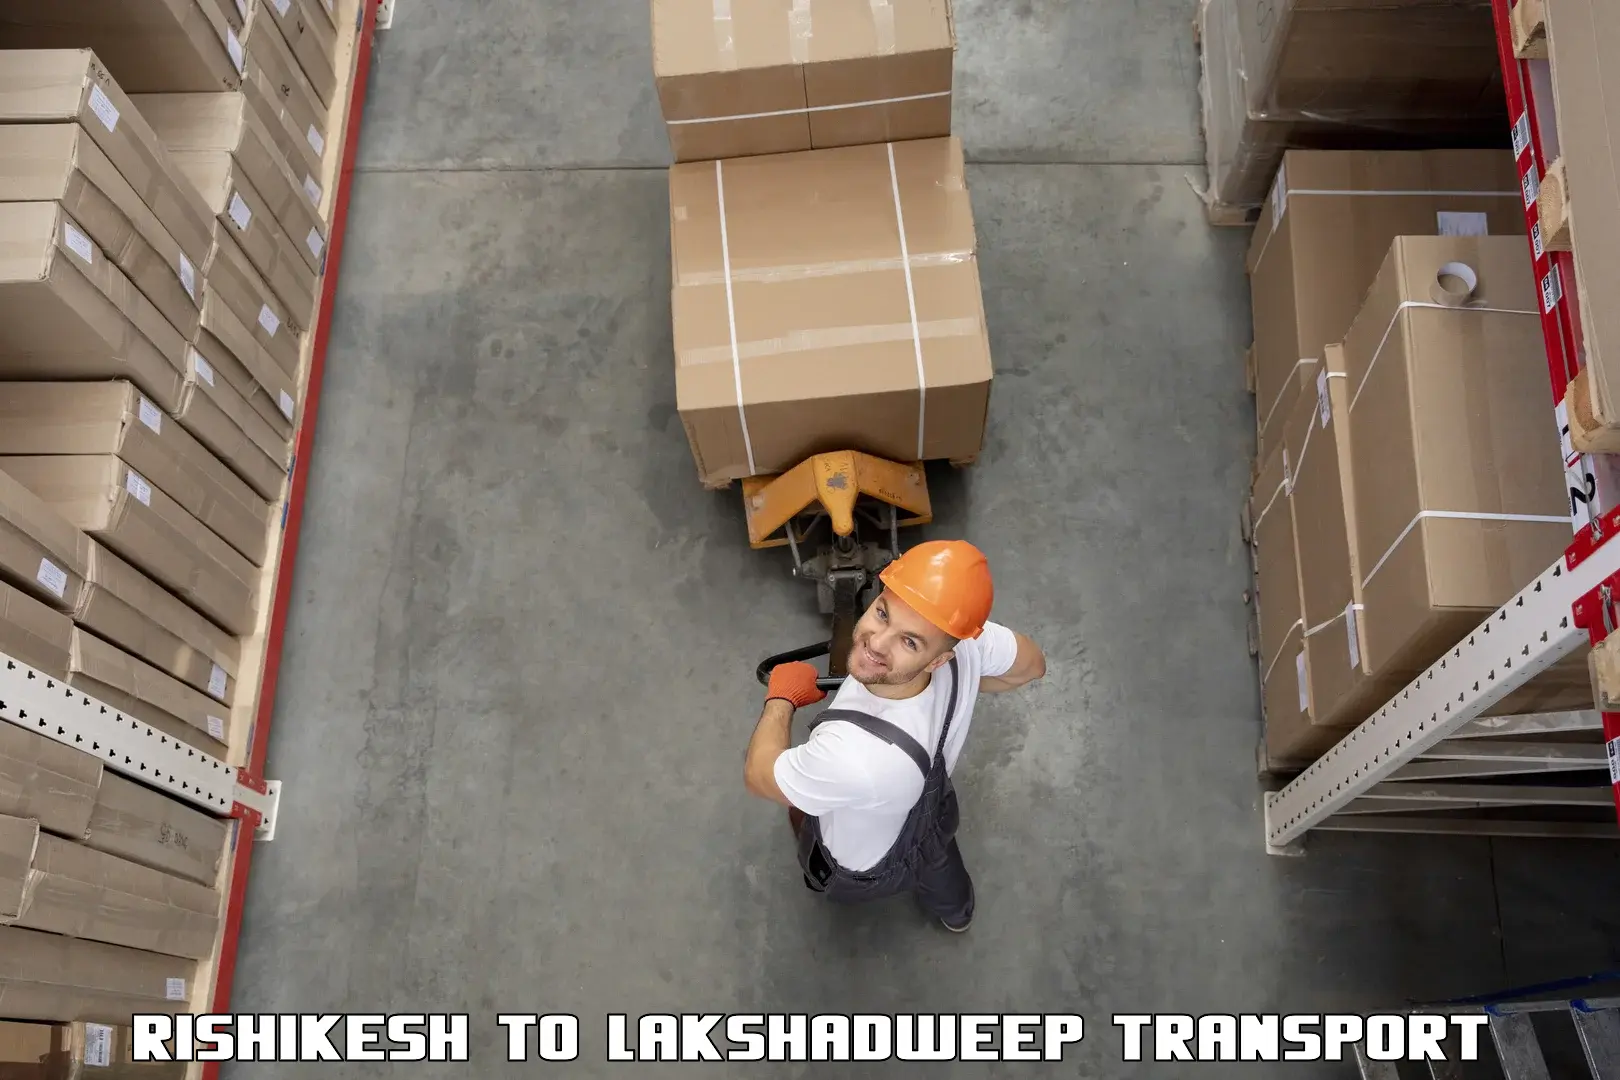 Commercial transport service Rishikesh to Lakshadweep